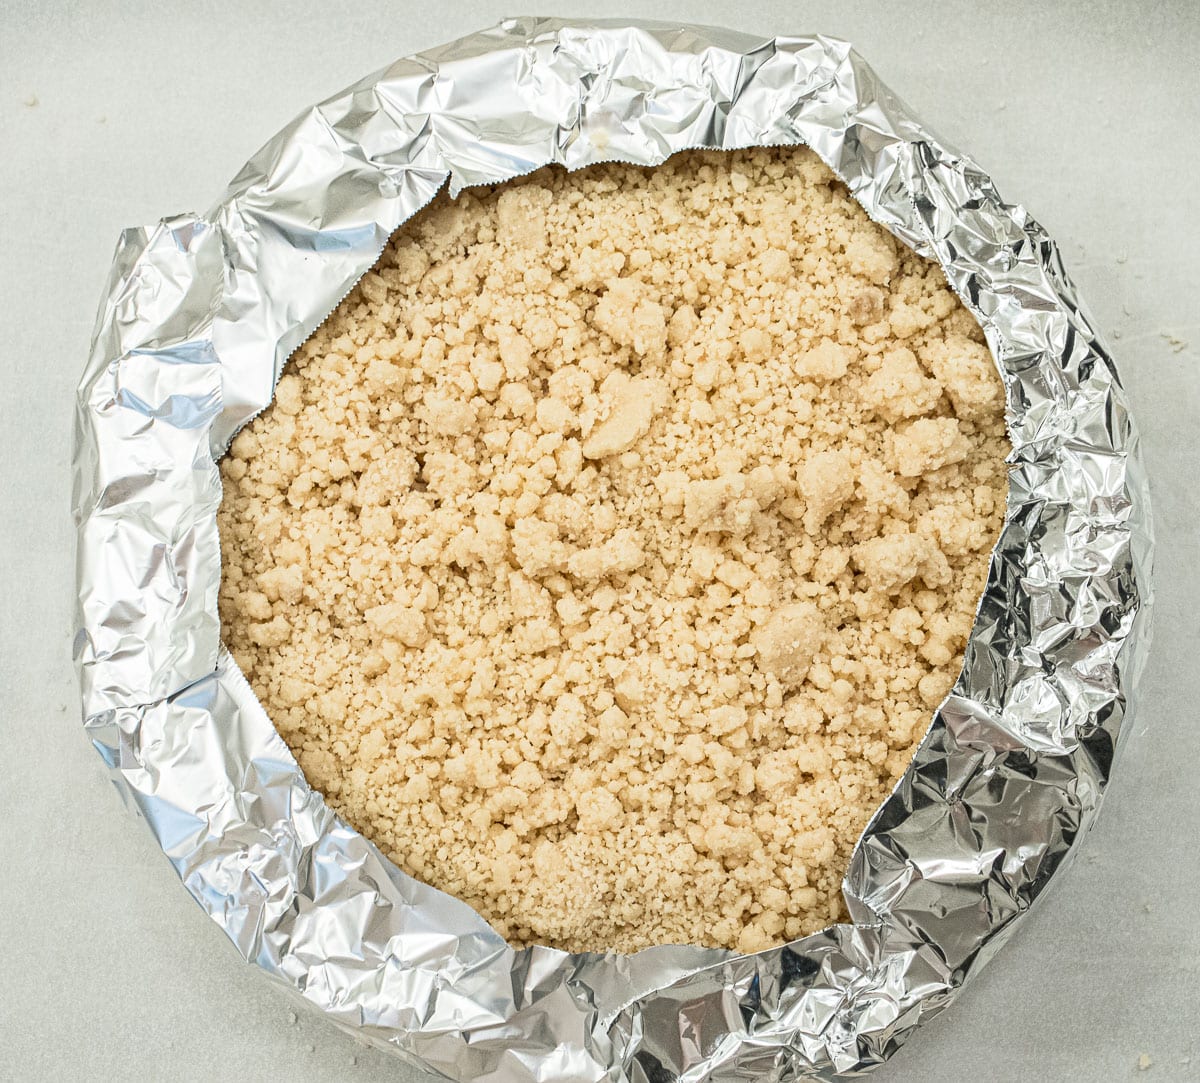 The edges of the pie are covered with foil to prevent overbrowning.